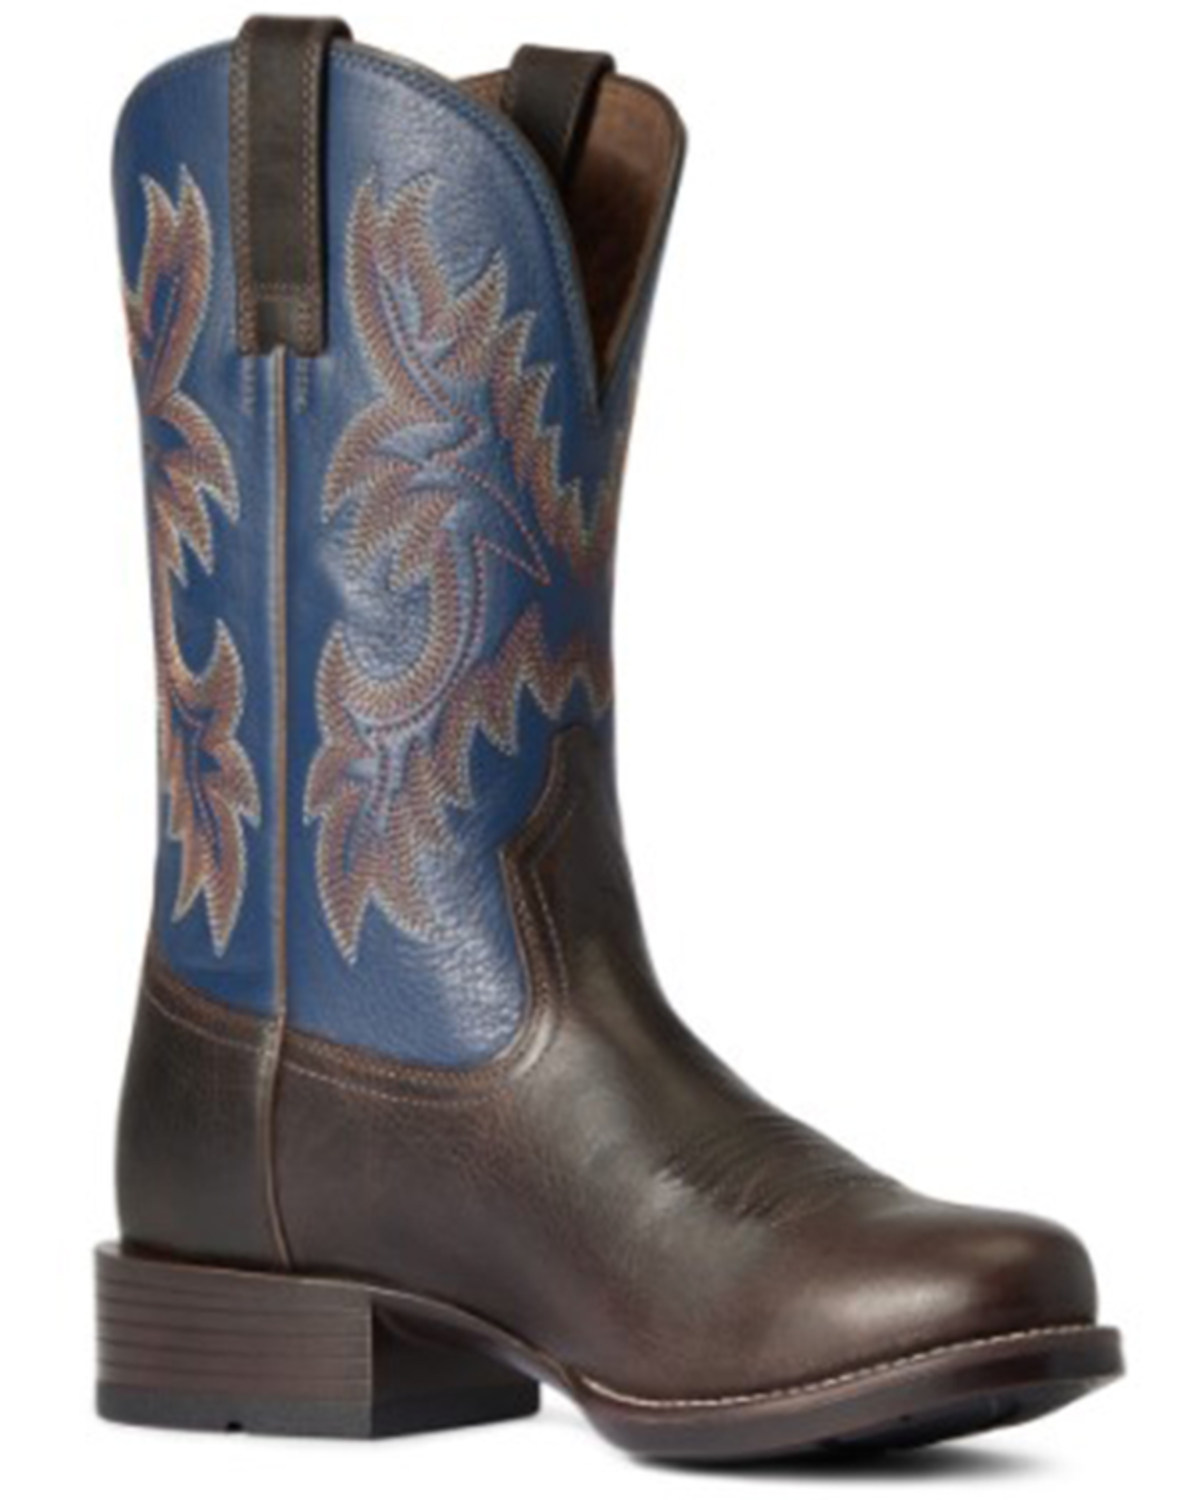 Ariat Men's Ultra Wicker Western Performance Boots - Round Toe